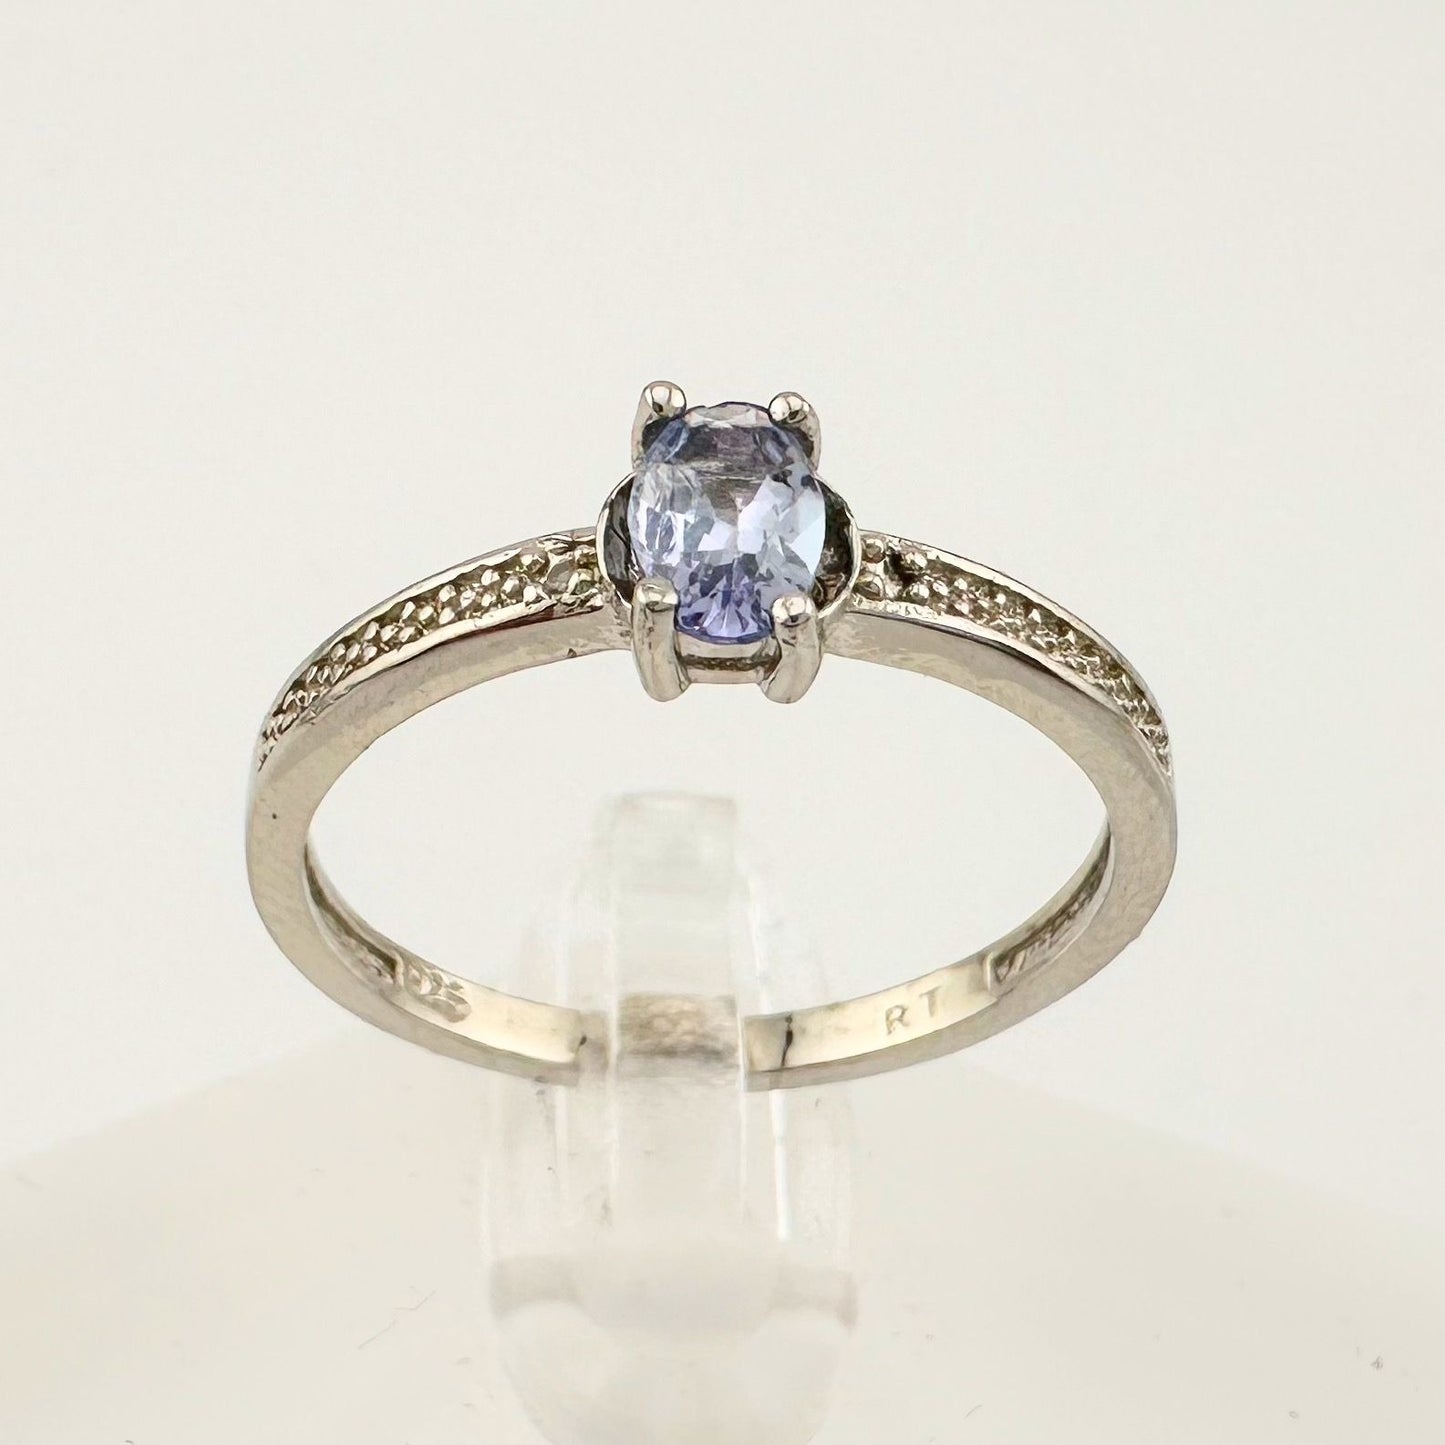 Beautiful Oval Tanzanite Ring with Diamond Accent - Sterling Silver Size 8.25